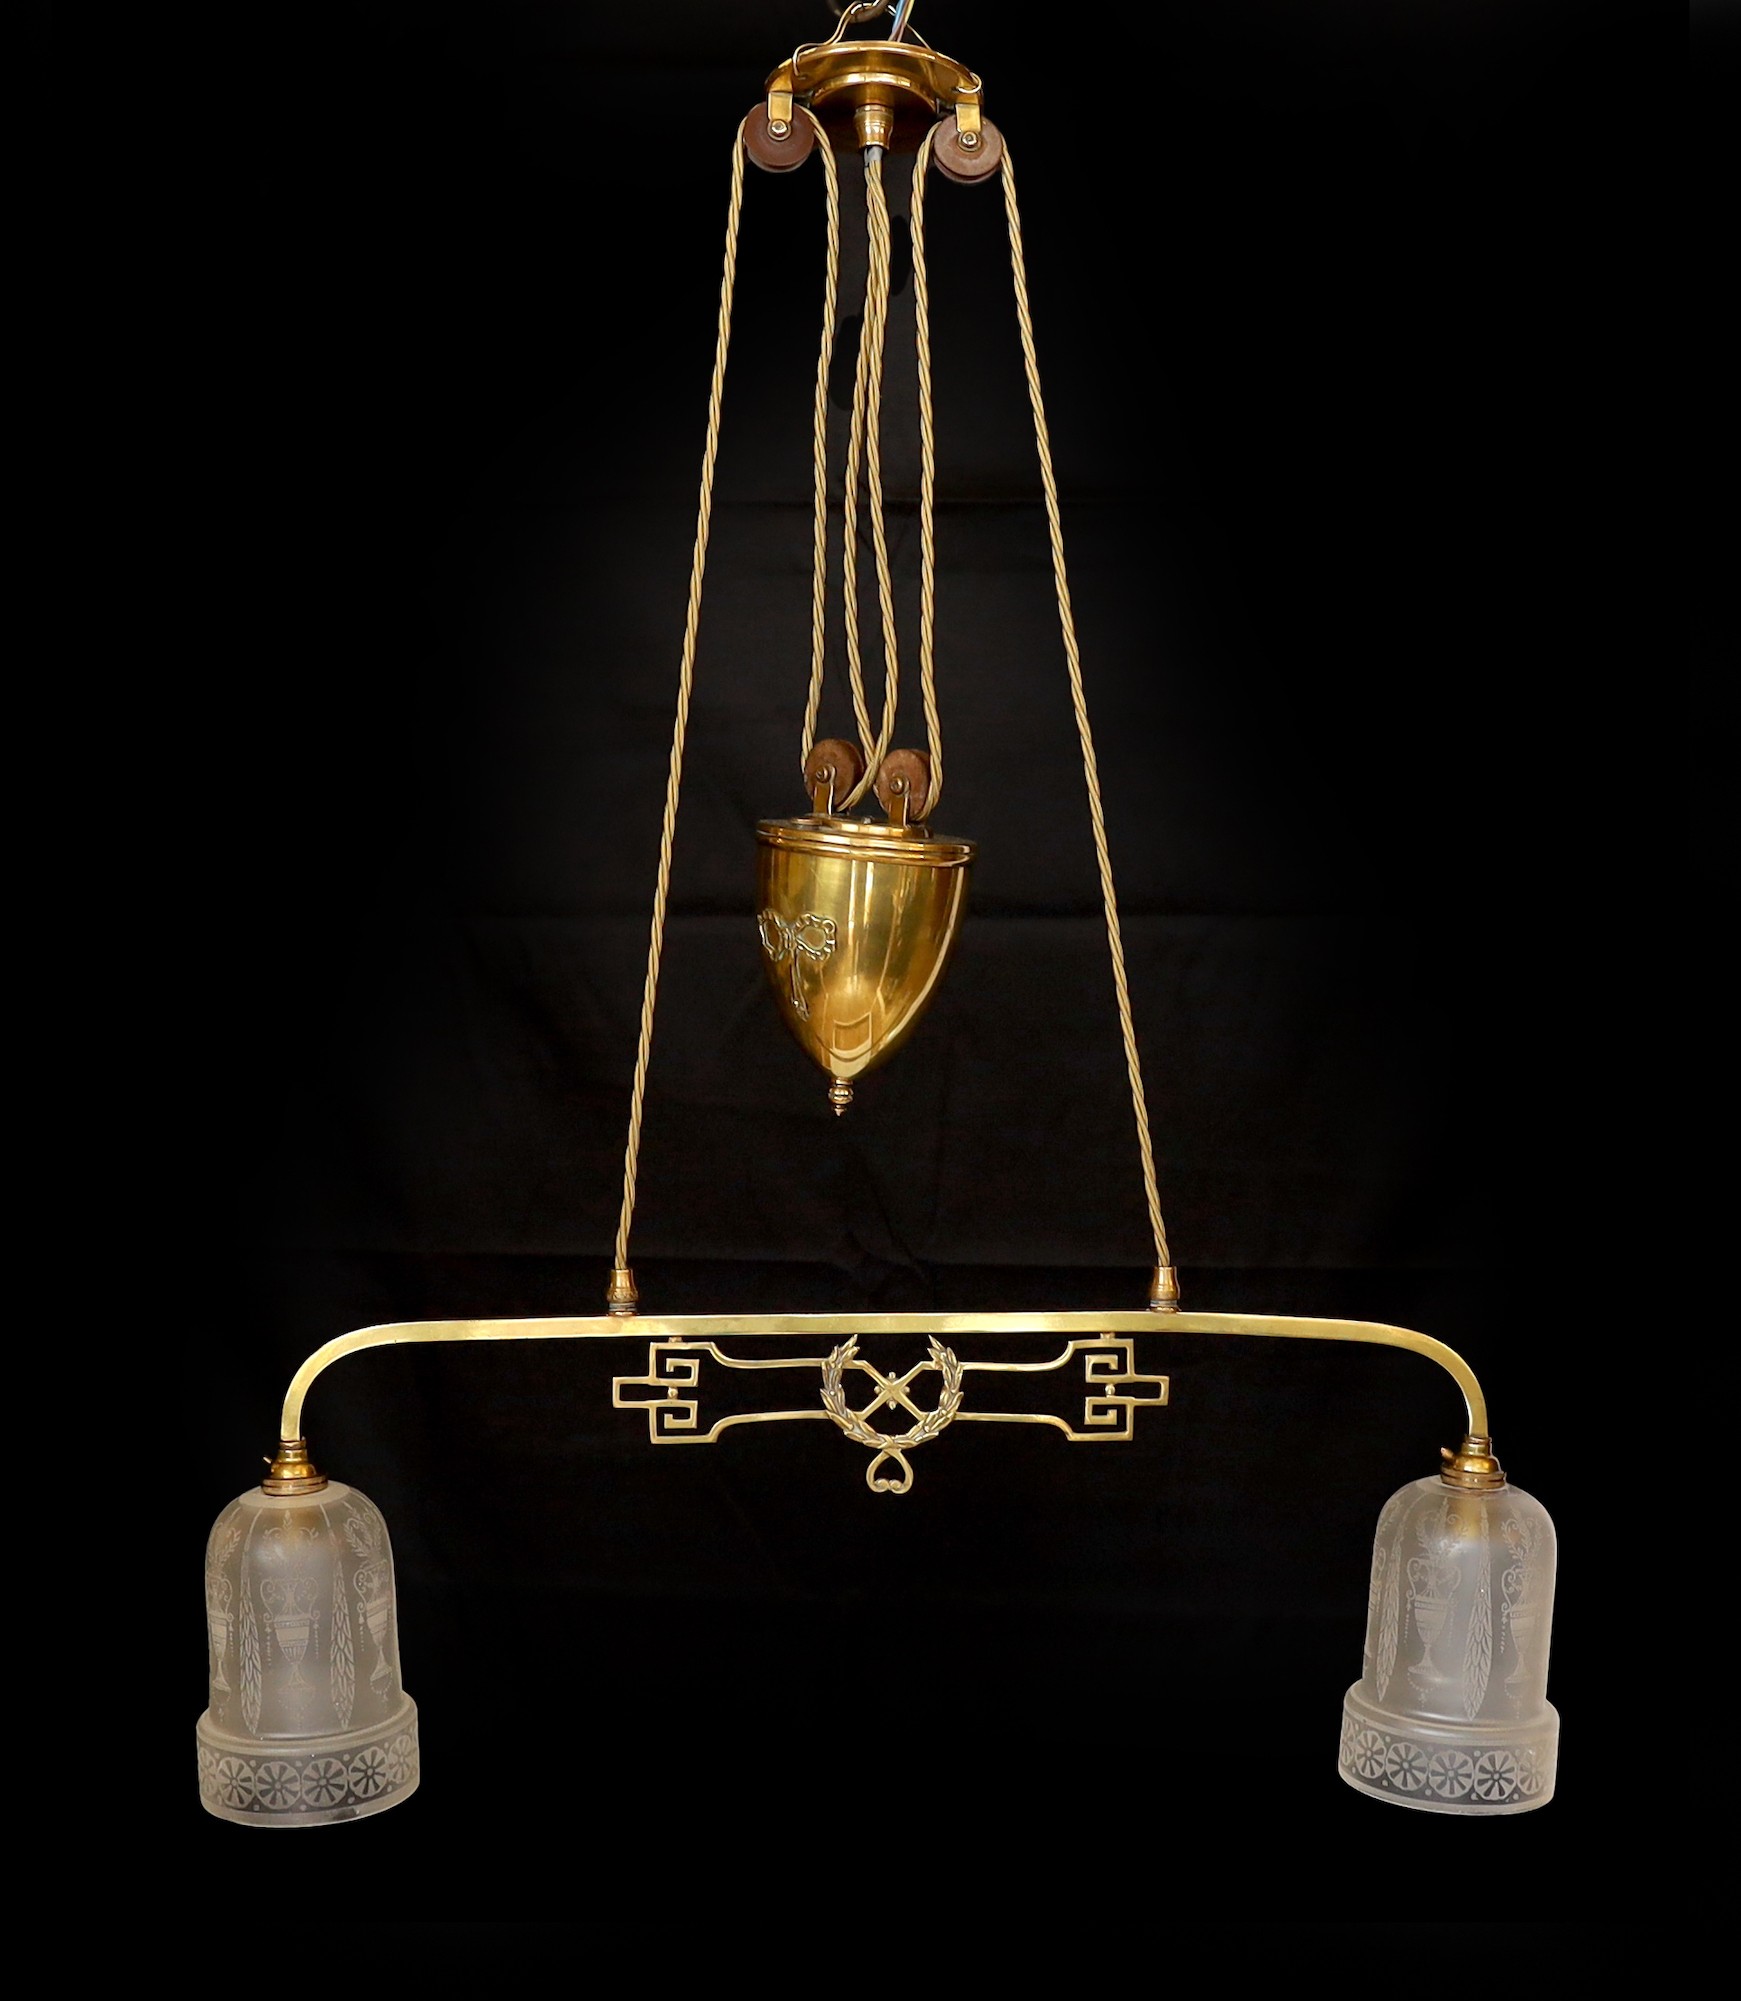 An Edwardian brass counter balanced light fitting with frosted glass shades etched with Grecian urns, height 80cm. width 64 cm